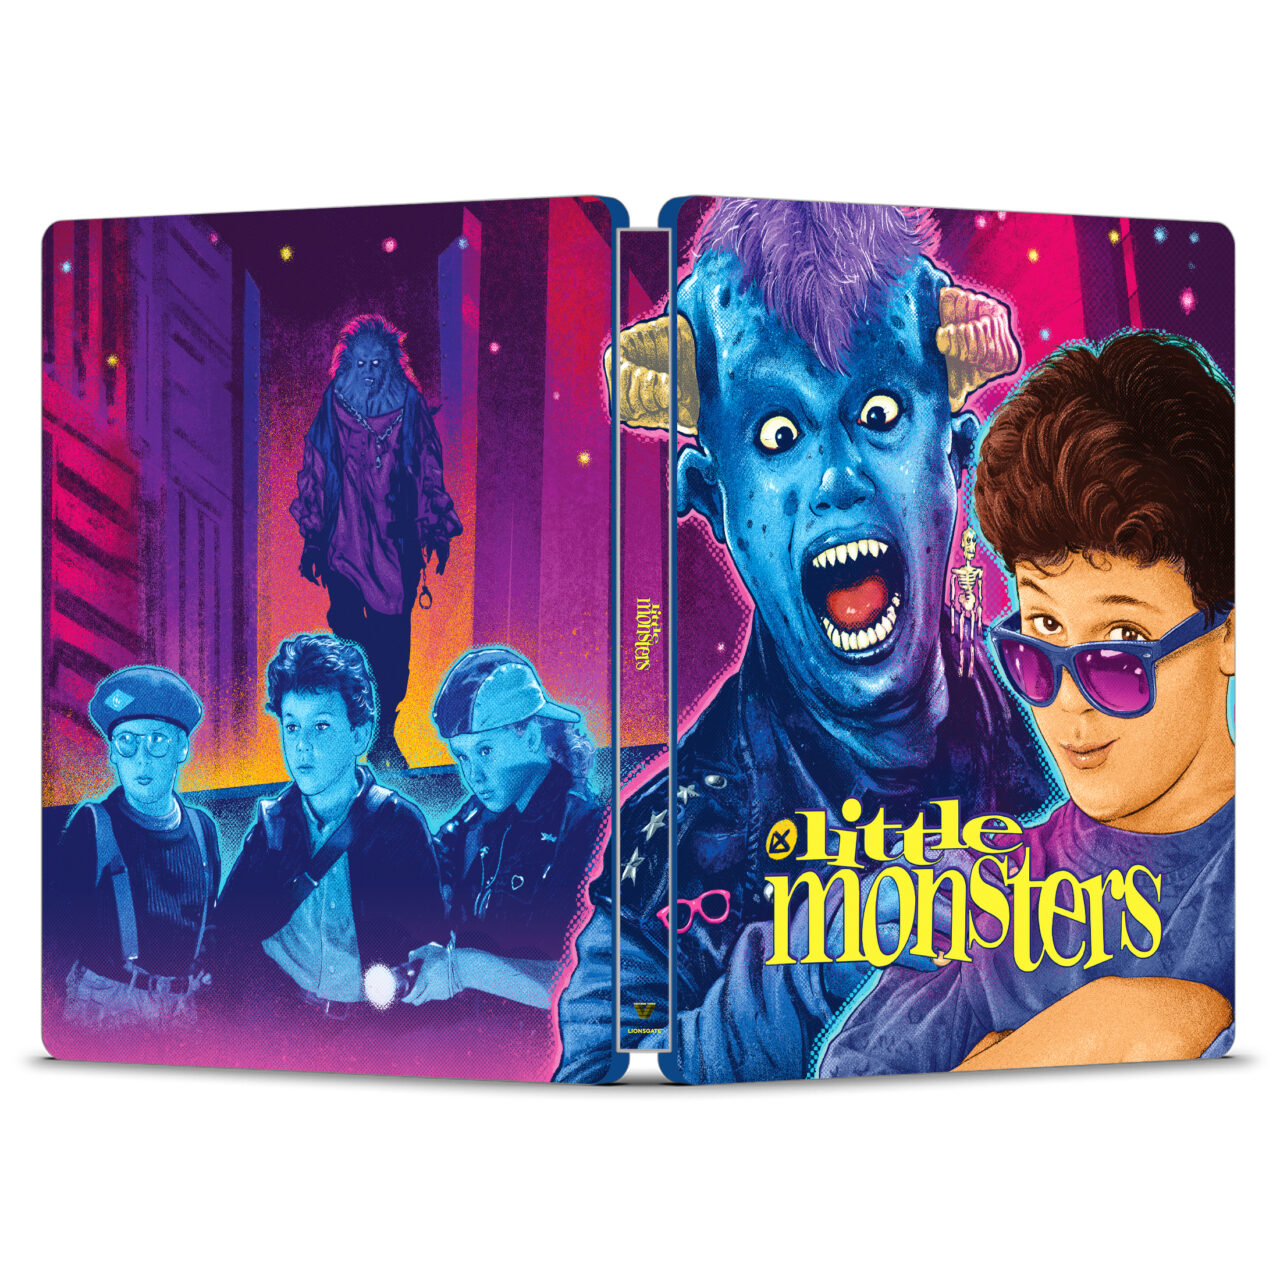 Little Monsters Blu-Ray Steelbook cover (Lionsgate)